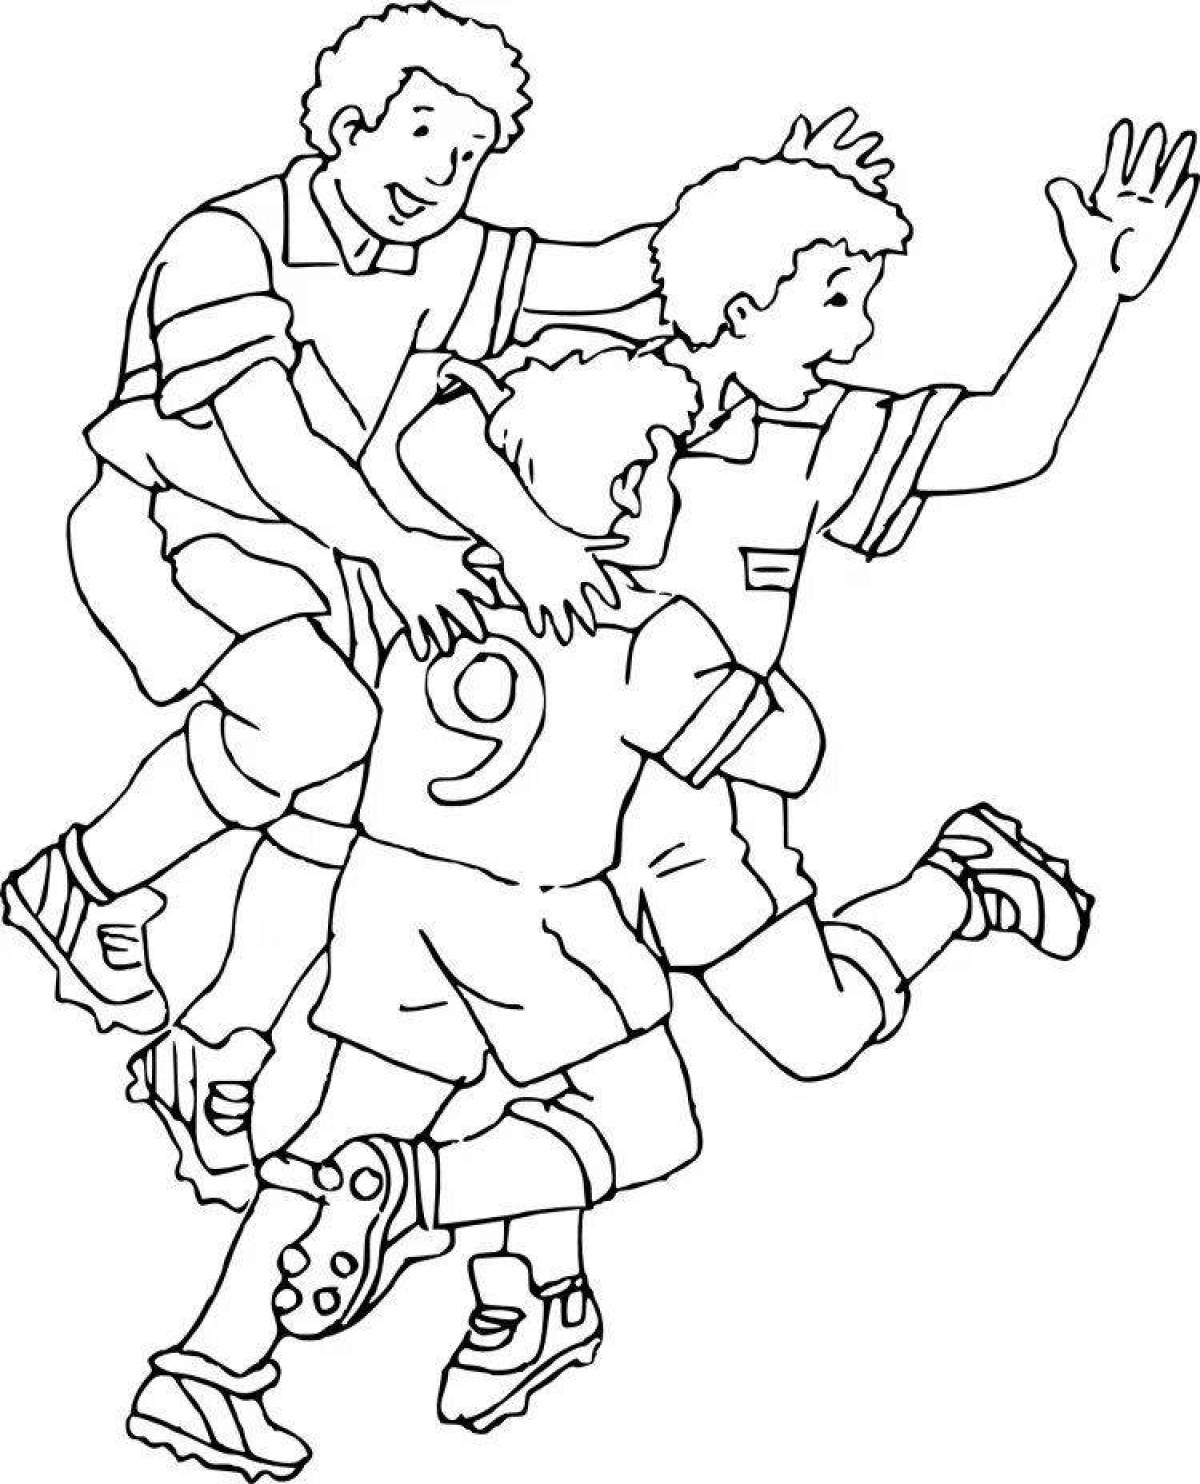 Color-fun coloring page player